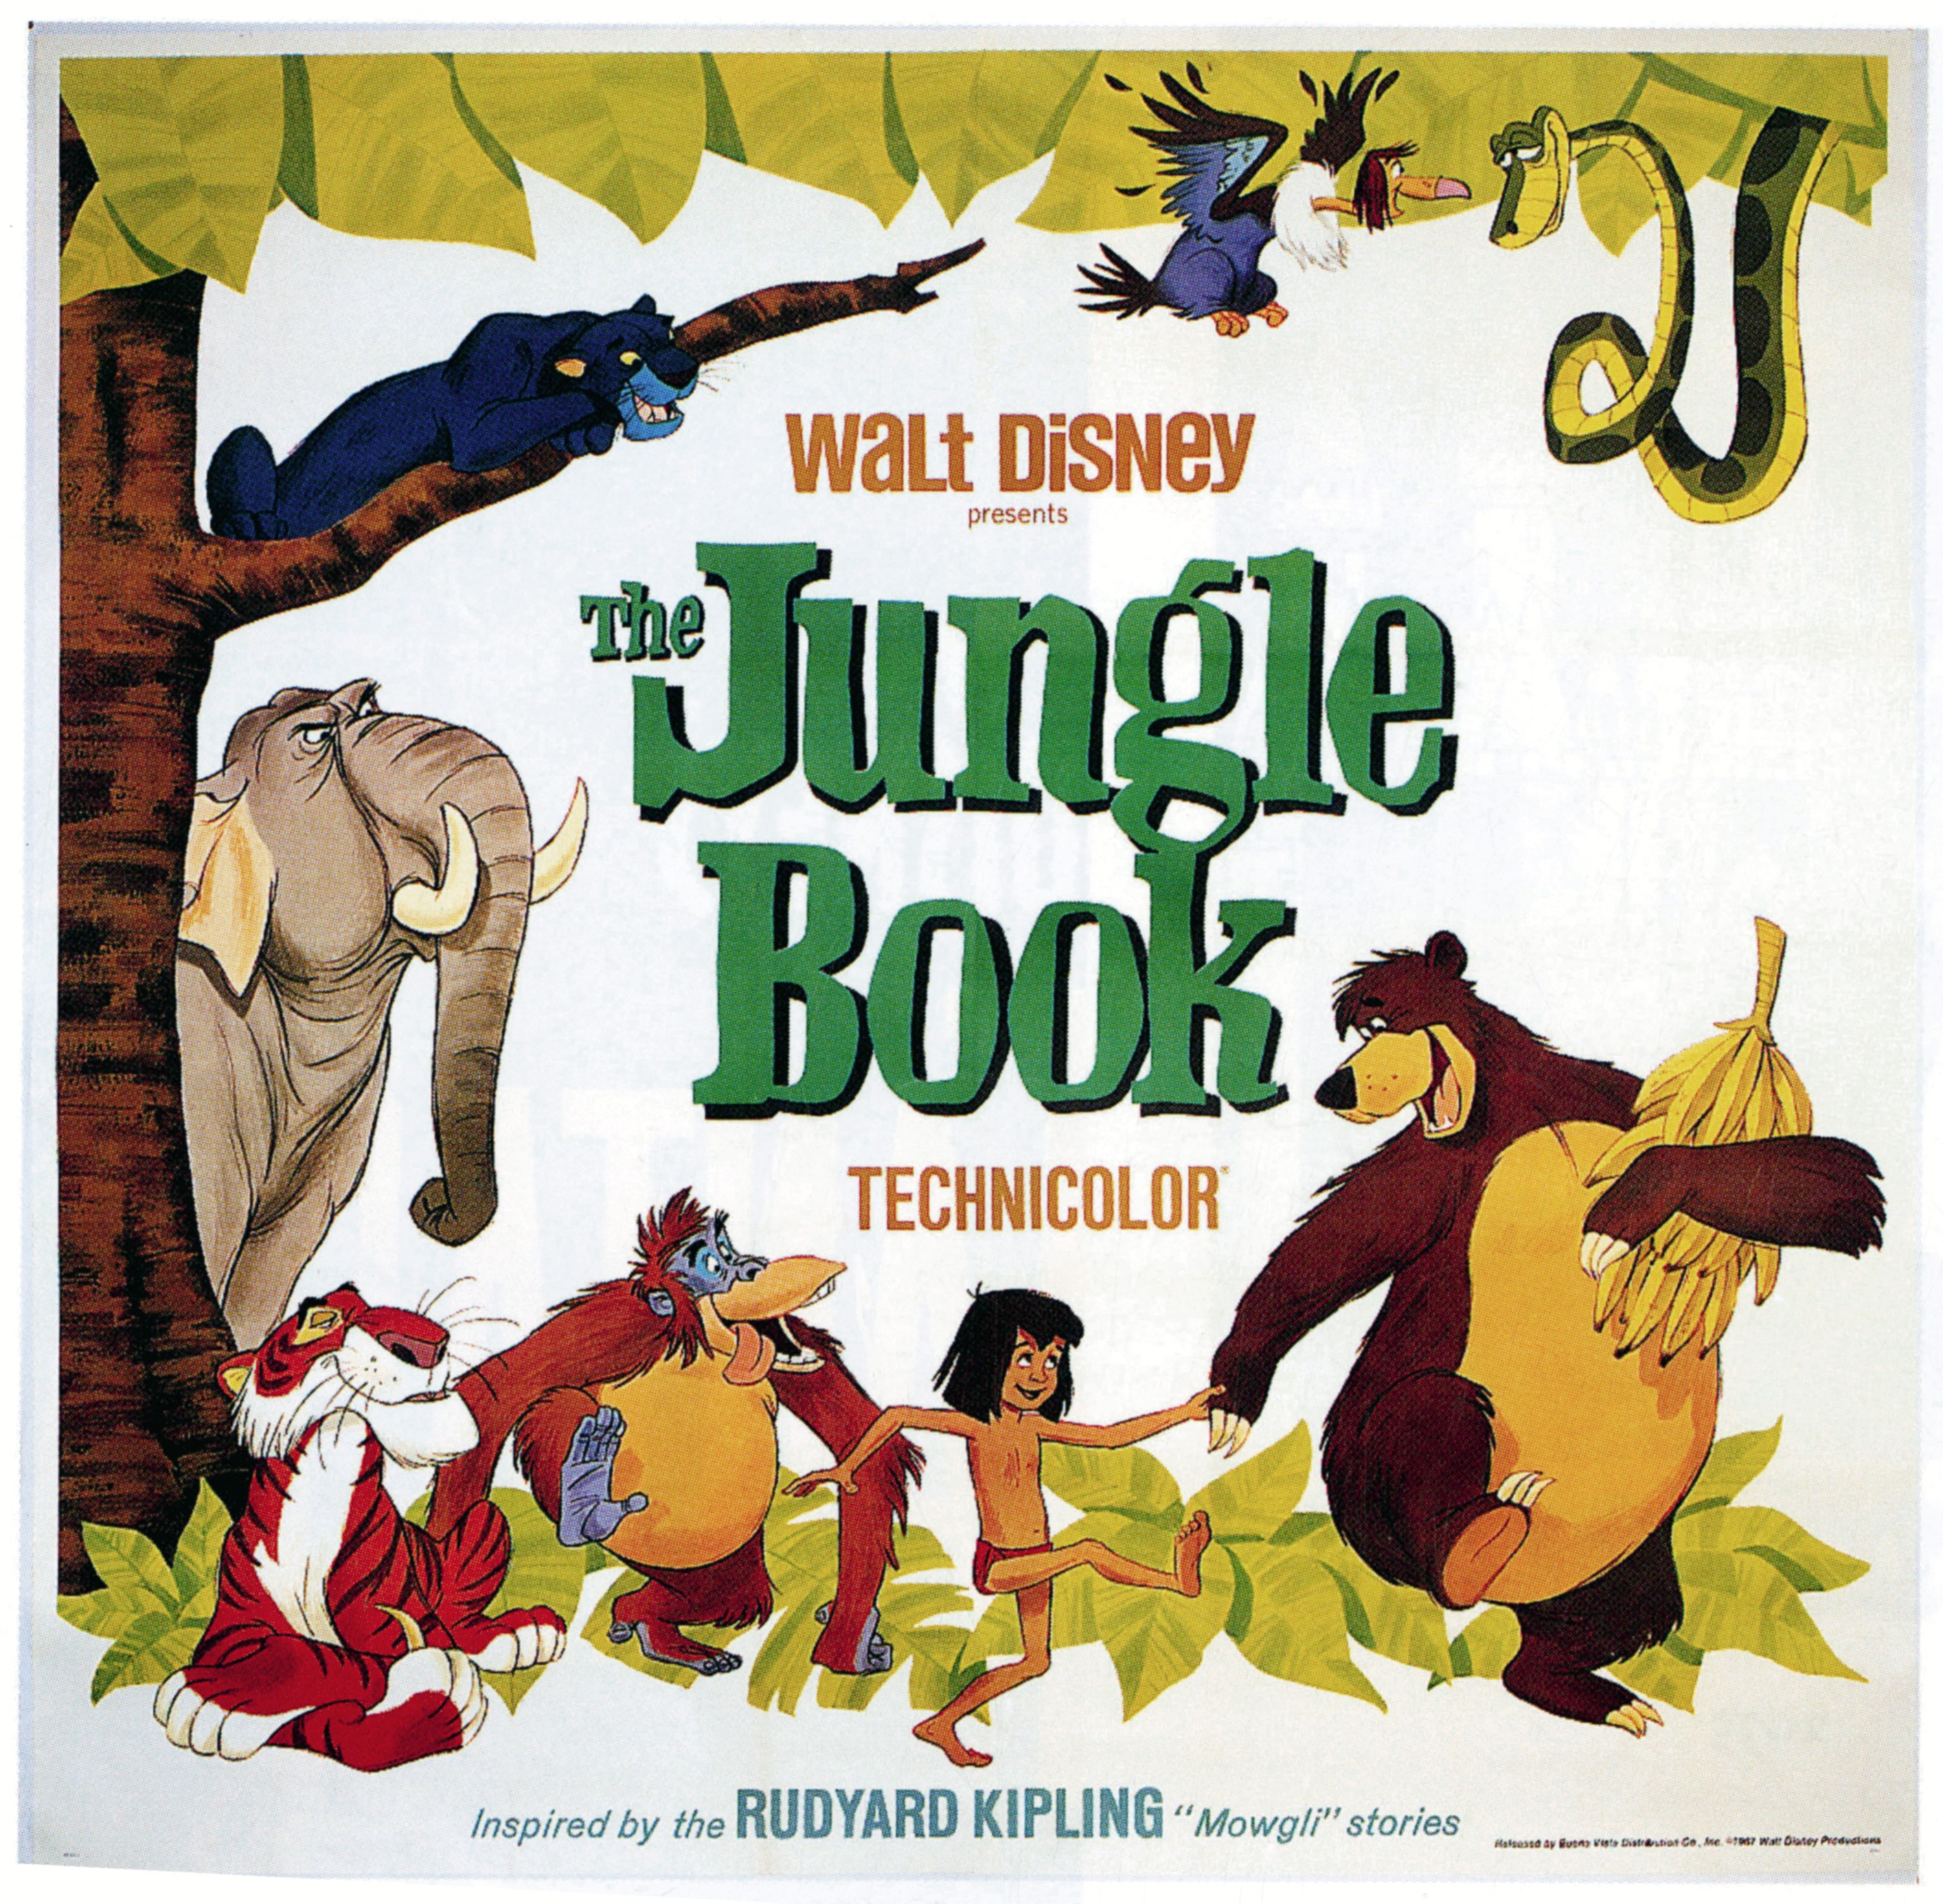 Why The Beatles Turned Down a Cameo in Disney's 'The Jungle Book'